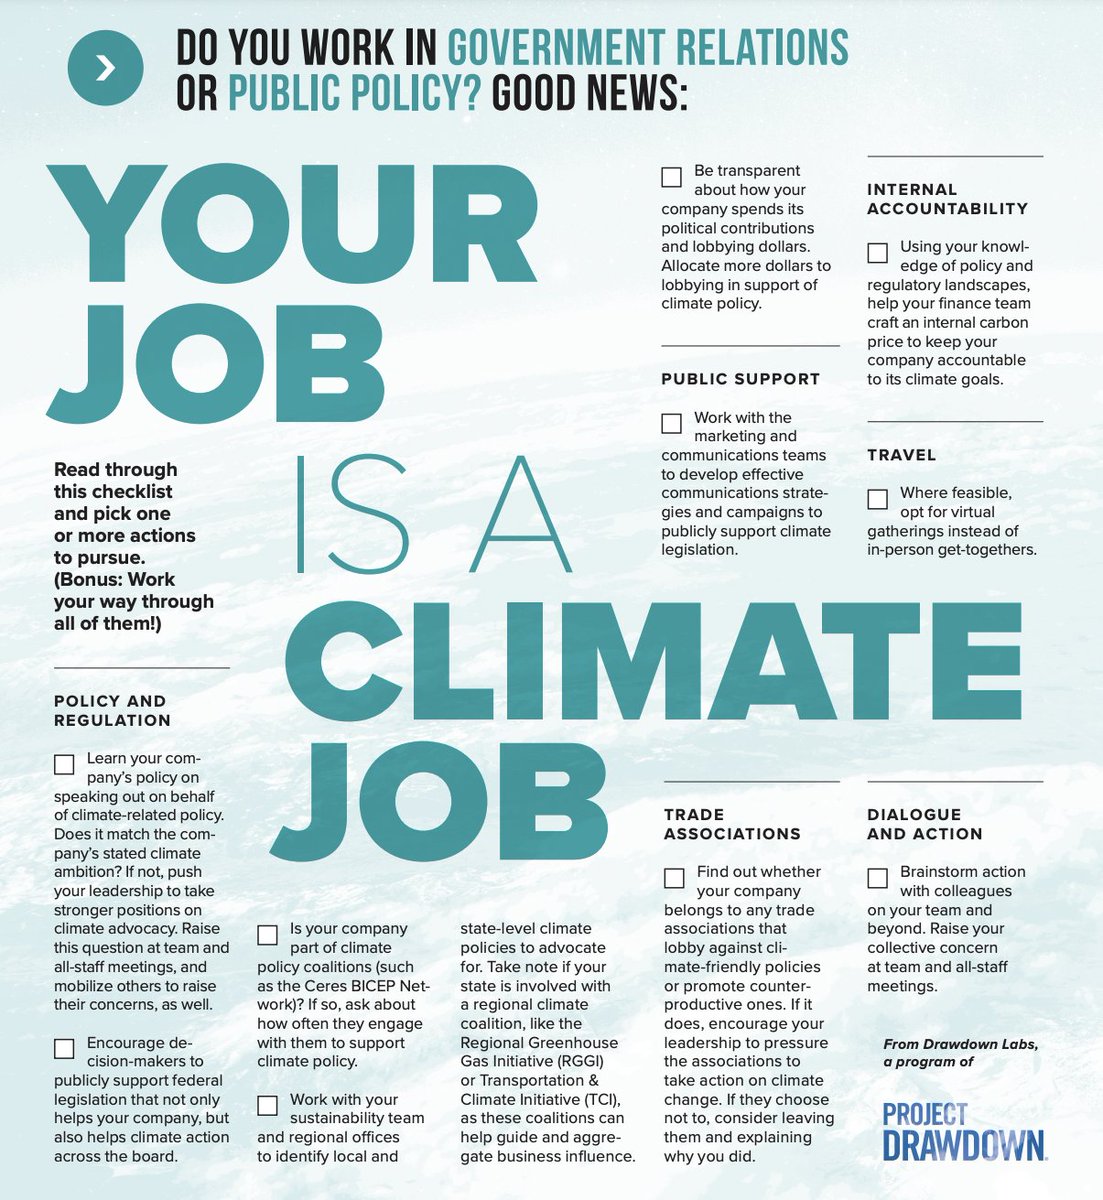 Do you work in government relations or public policy? Then we invite you to head on over & check out our #DrawdownLabs job function action guides to learn how you can use your current role to make an impact in the fight against climate change! drawdown.org/programs/drawd…